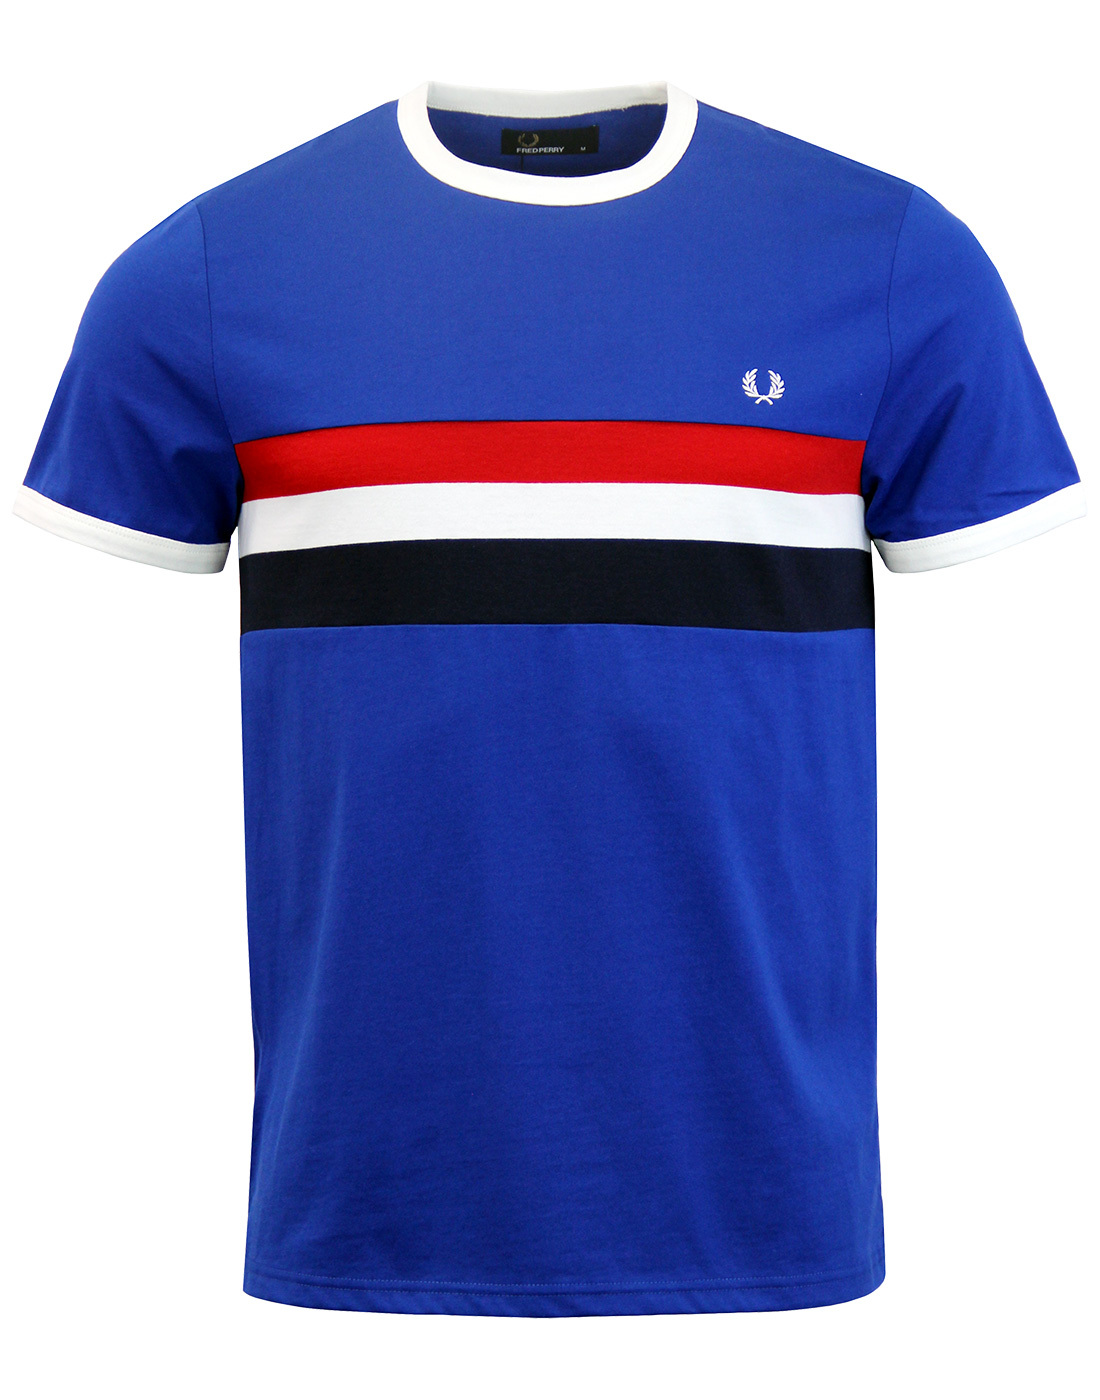 FRED PERRY Retro Mod Striped Panel Ringer Tee